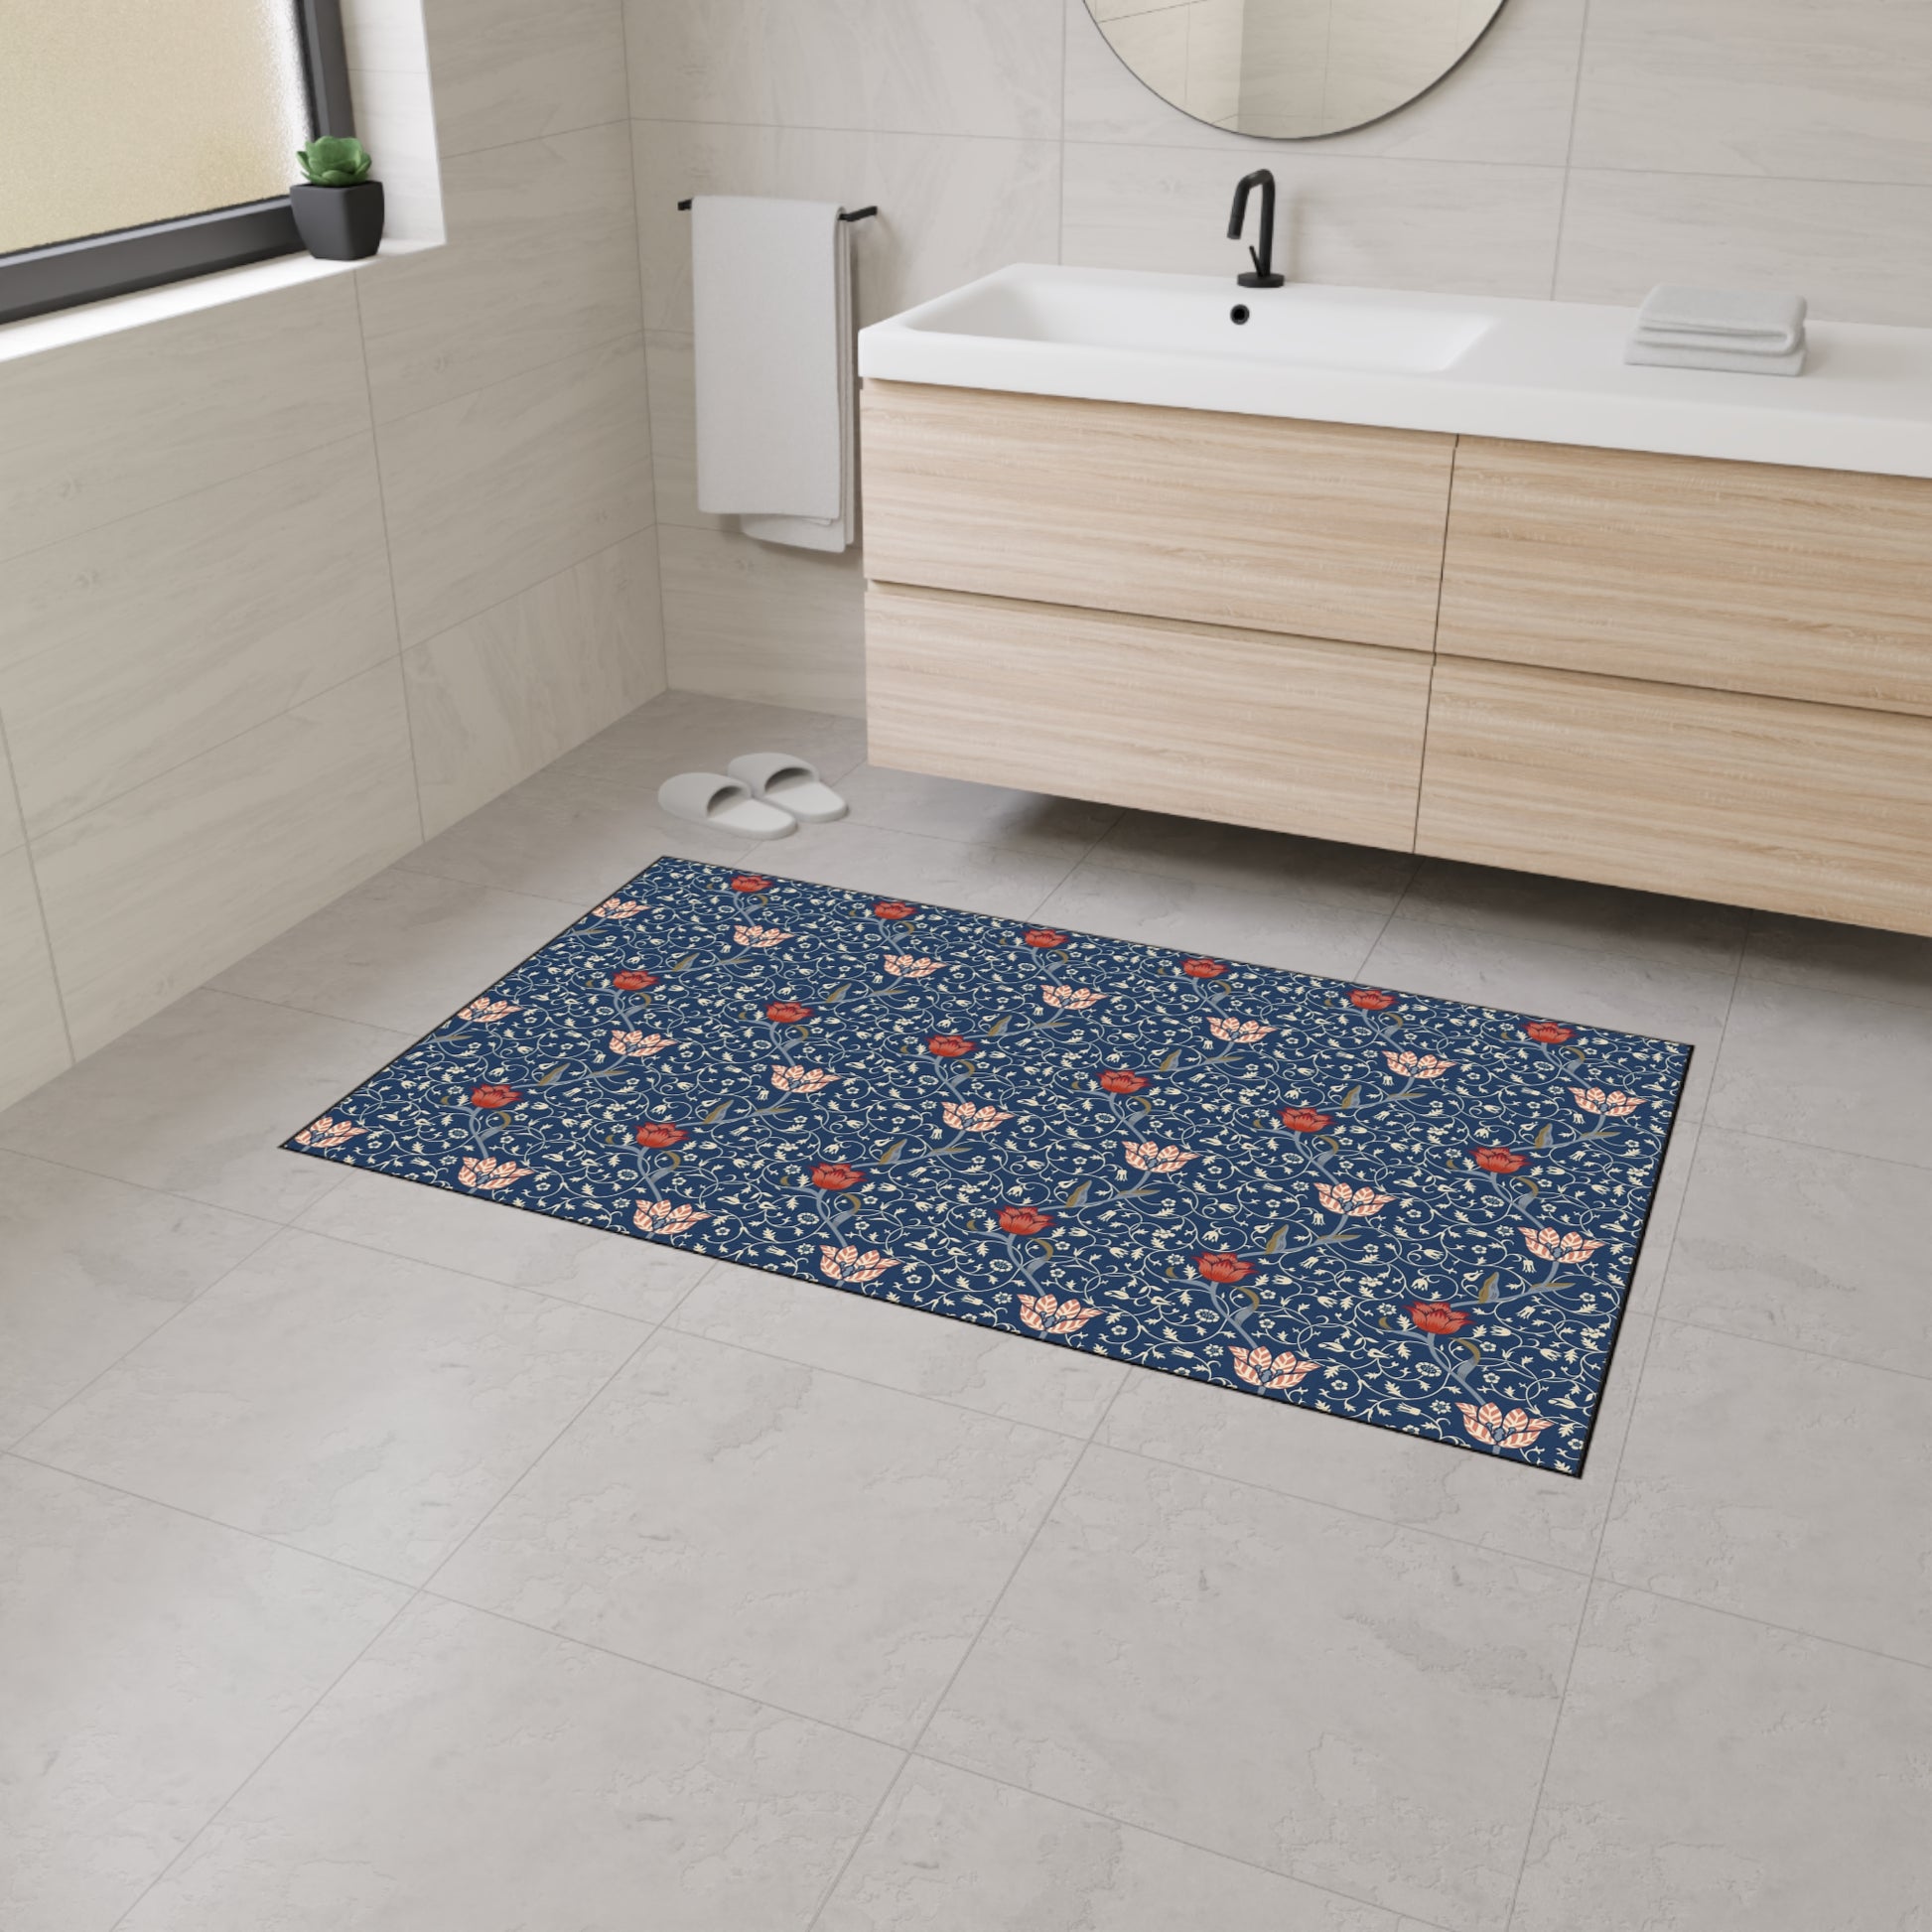 william-morris-co-heavy-duty-floor-mat-medway-collection-16